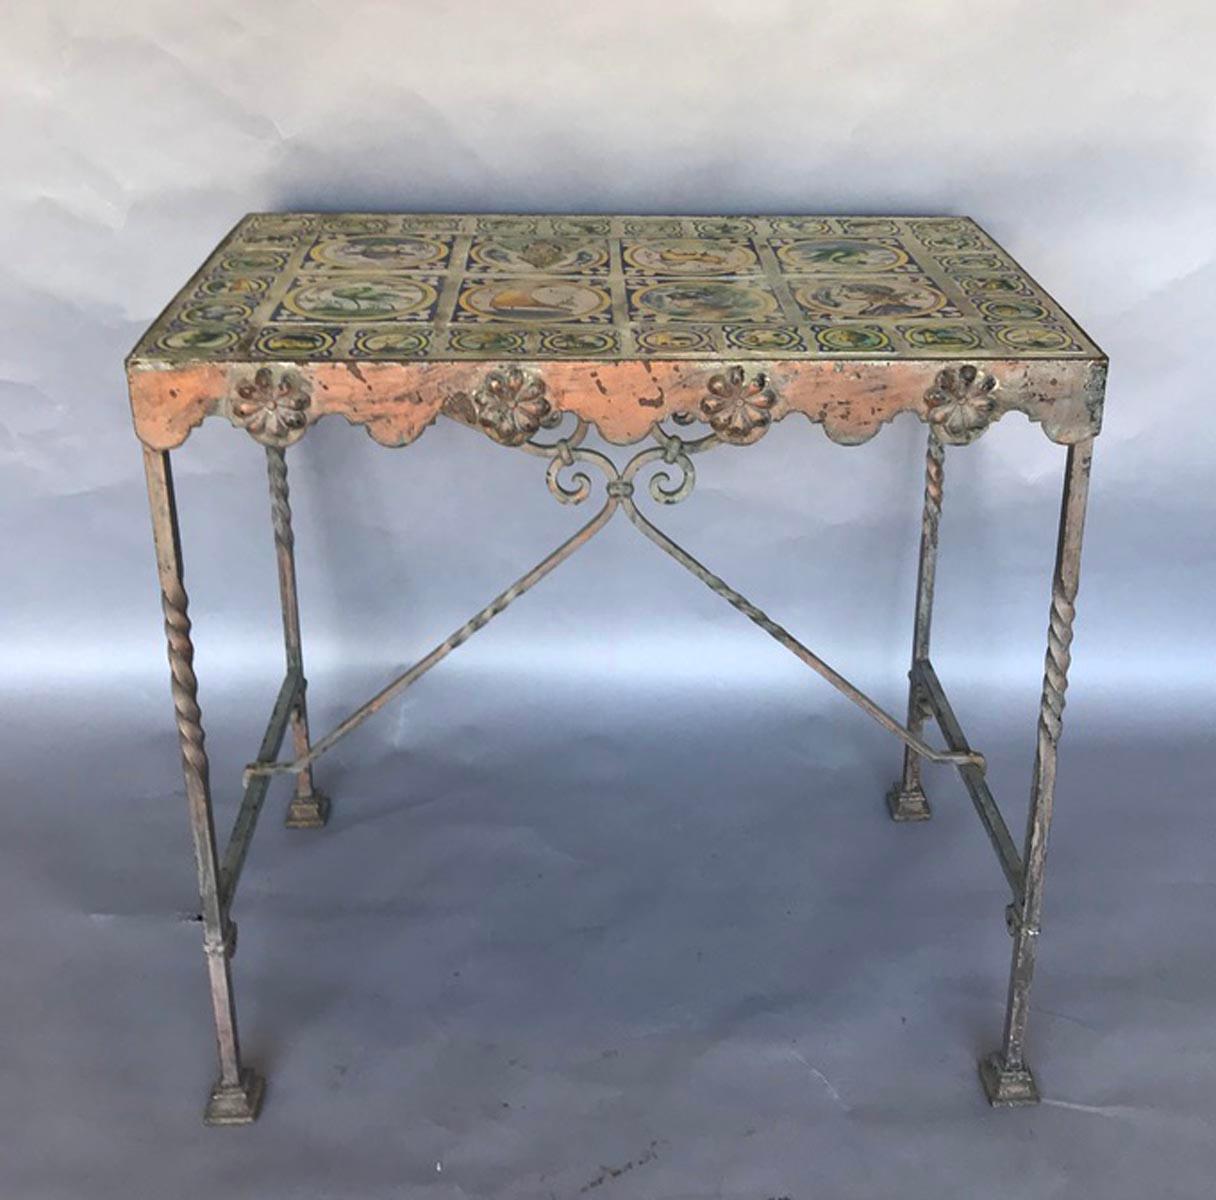 Rustic tile inset garden table with iron legs and stretcher. Remnants of light pink and grey pant on base. Glazed ceramic tiles.